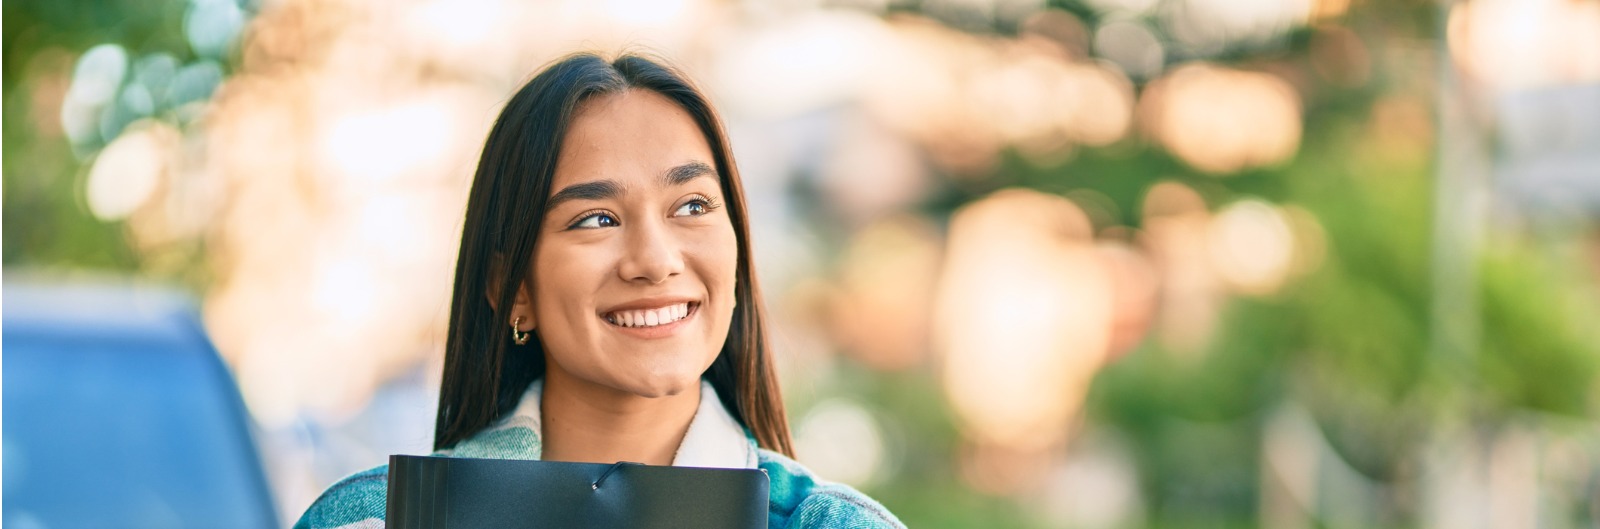 young-latin-student-girl-smiling-happy-holding-folder-at-the-city-picture-1600x529.jpg